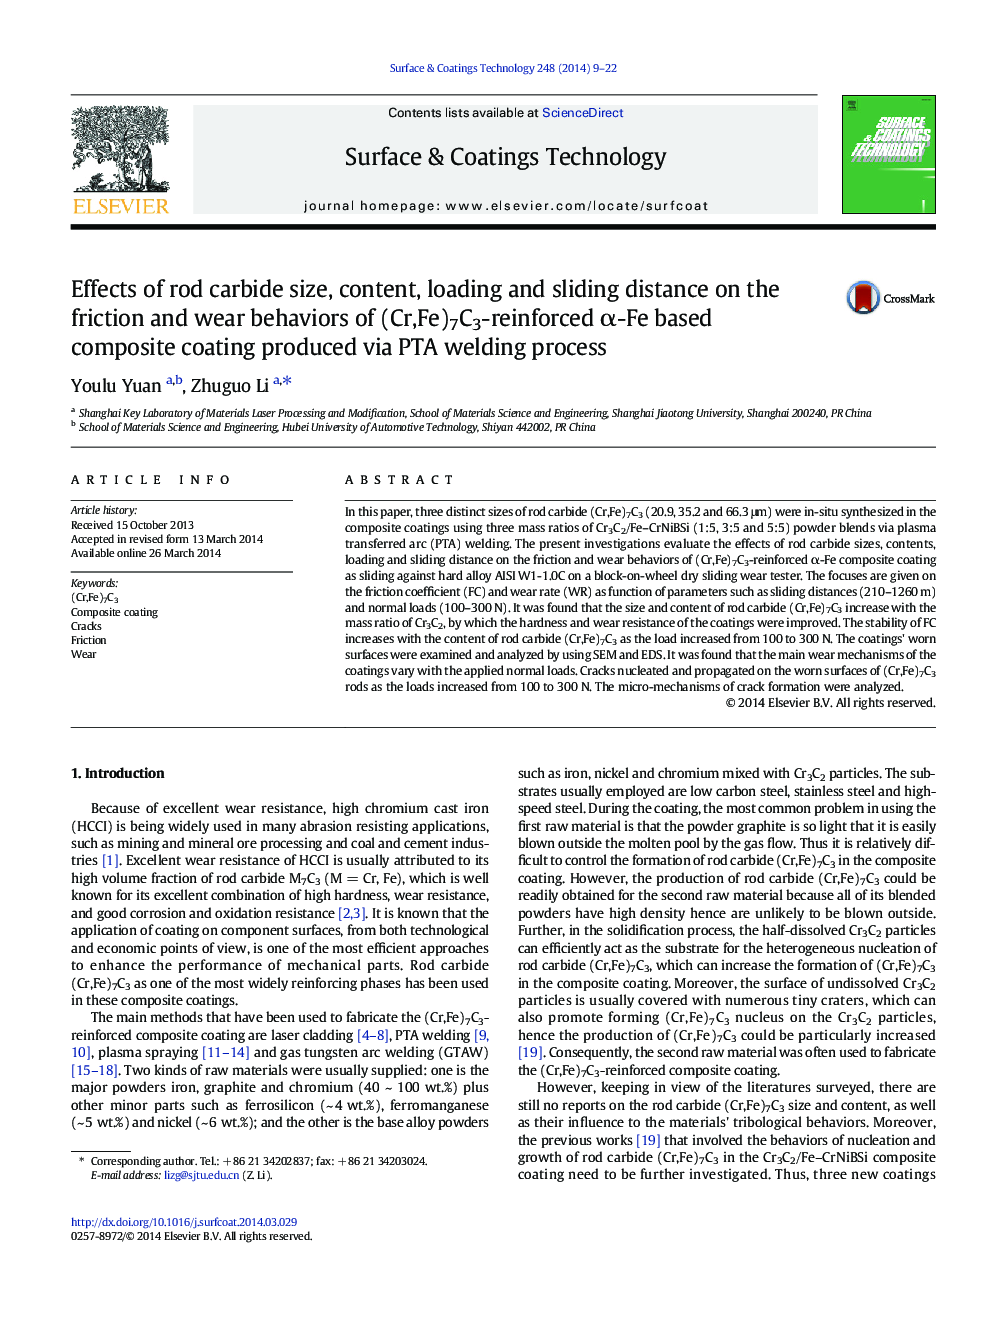 Effects of rod carbide size, content, loading and sliding distance on the friction and wear behaviors of (Cr,Fe)7C3-reinforced Î±-Fe based composite coating produced via PTA welding process